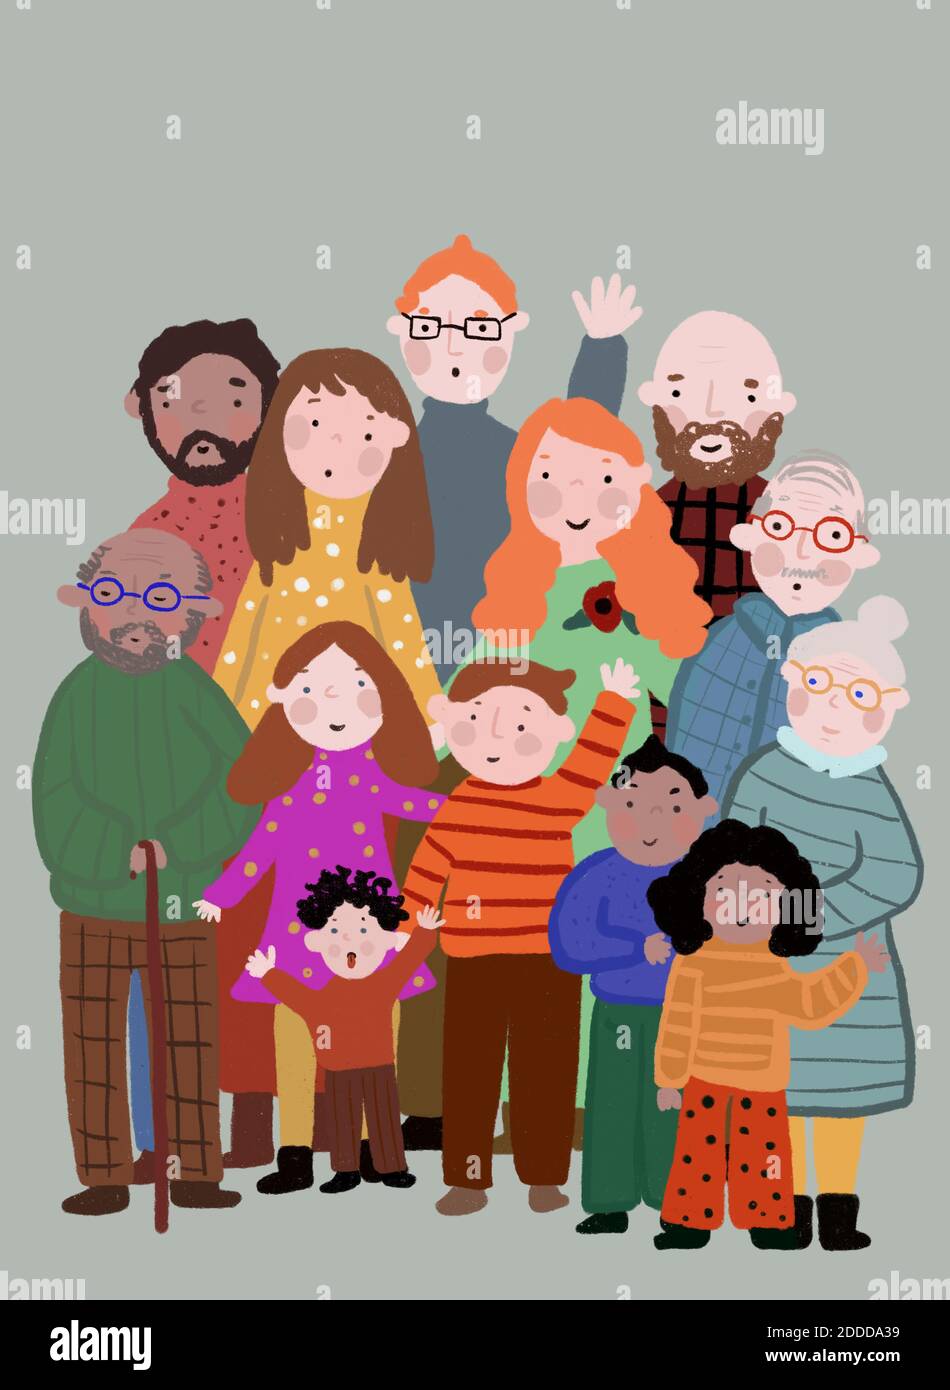 Clip art of multi-generation Family posing together for photo Stock Photo